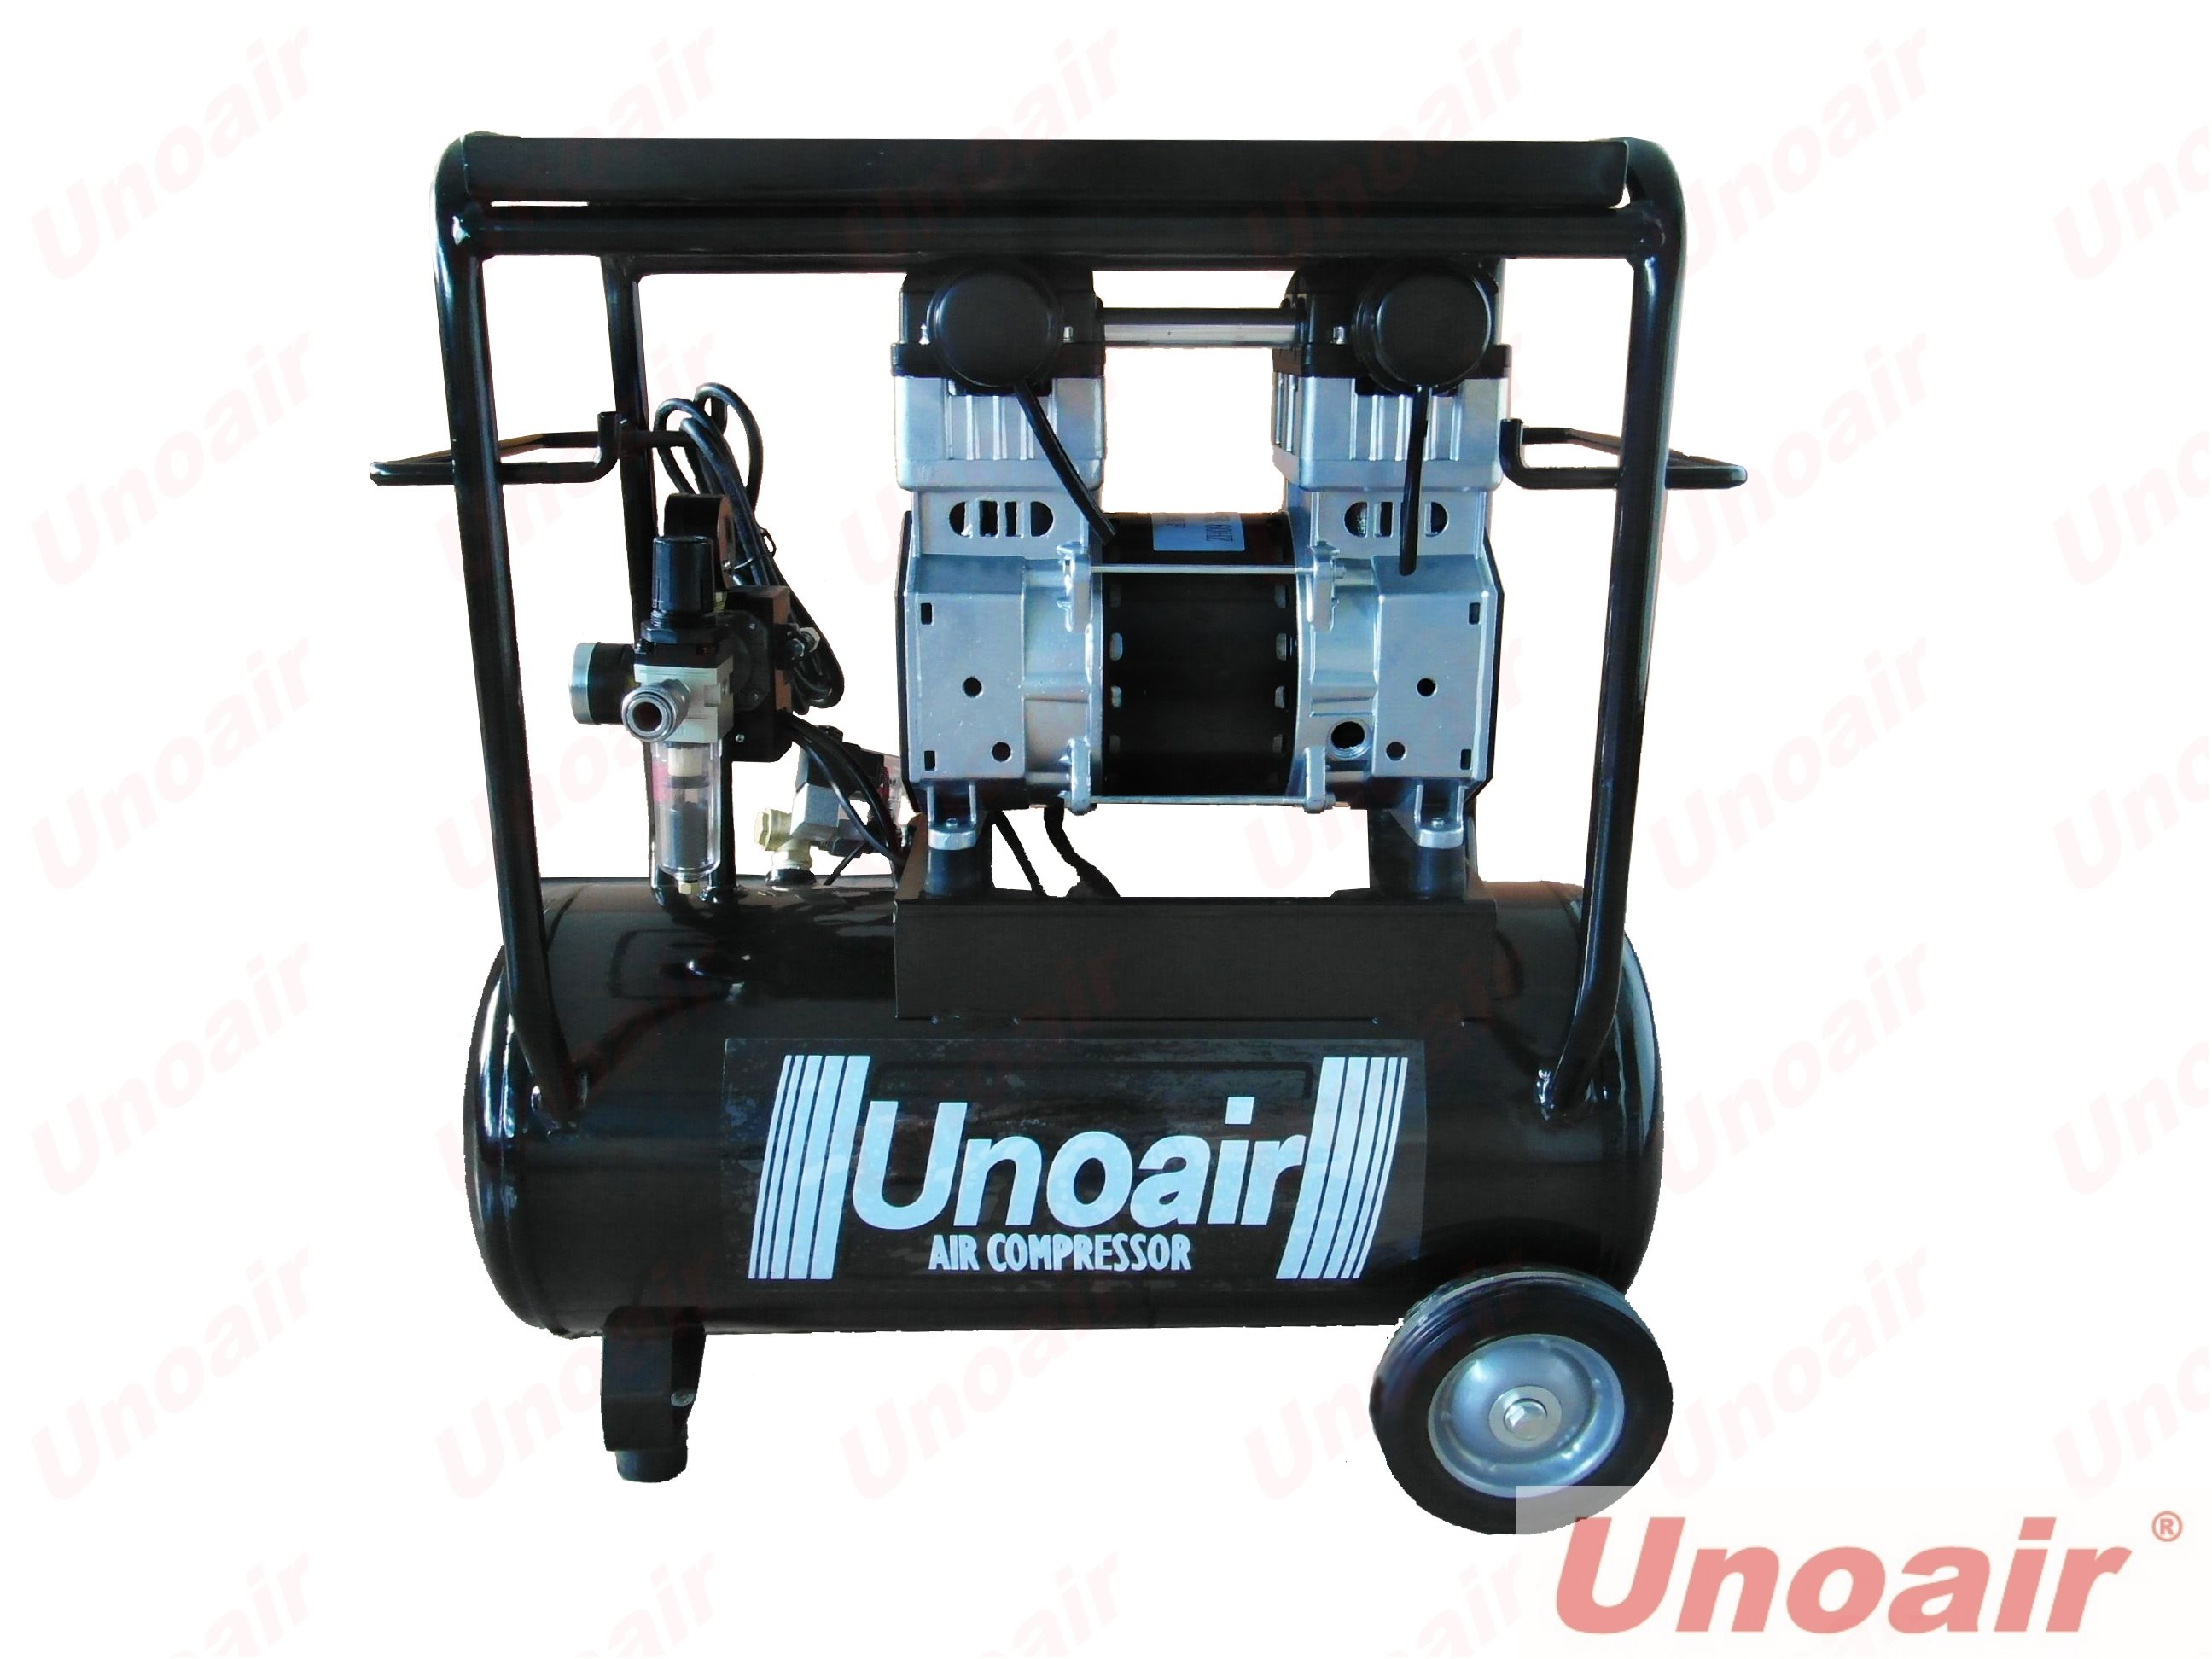 UNOAIR Weekly Update 03/04/2022 Power Up Your Workstation & Factory with Unoair